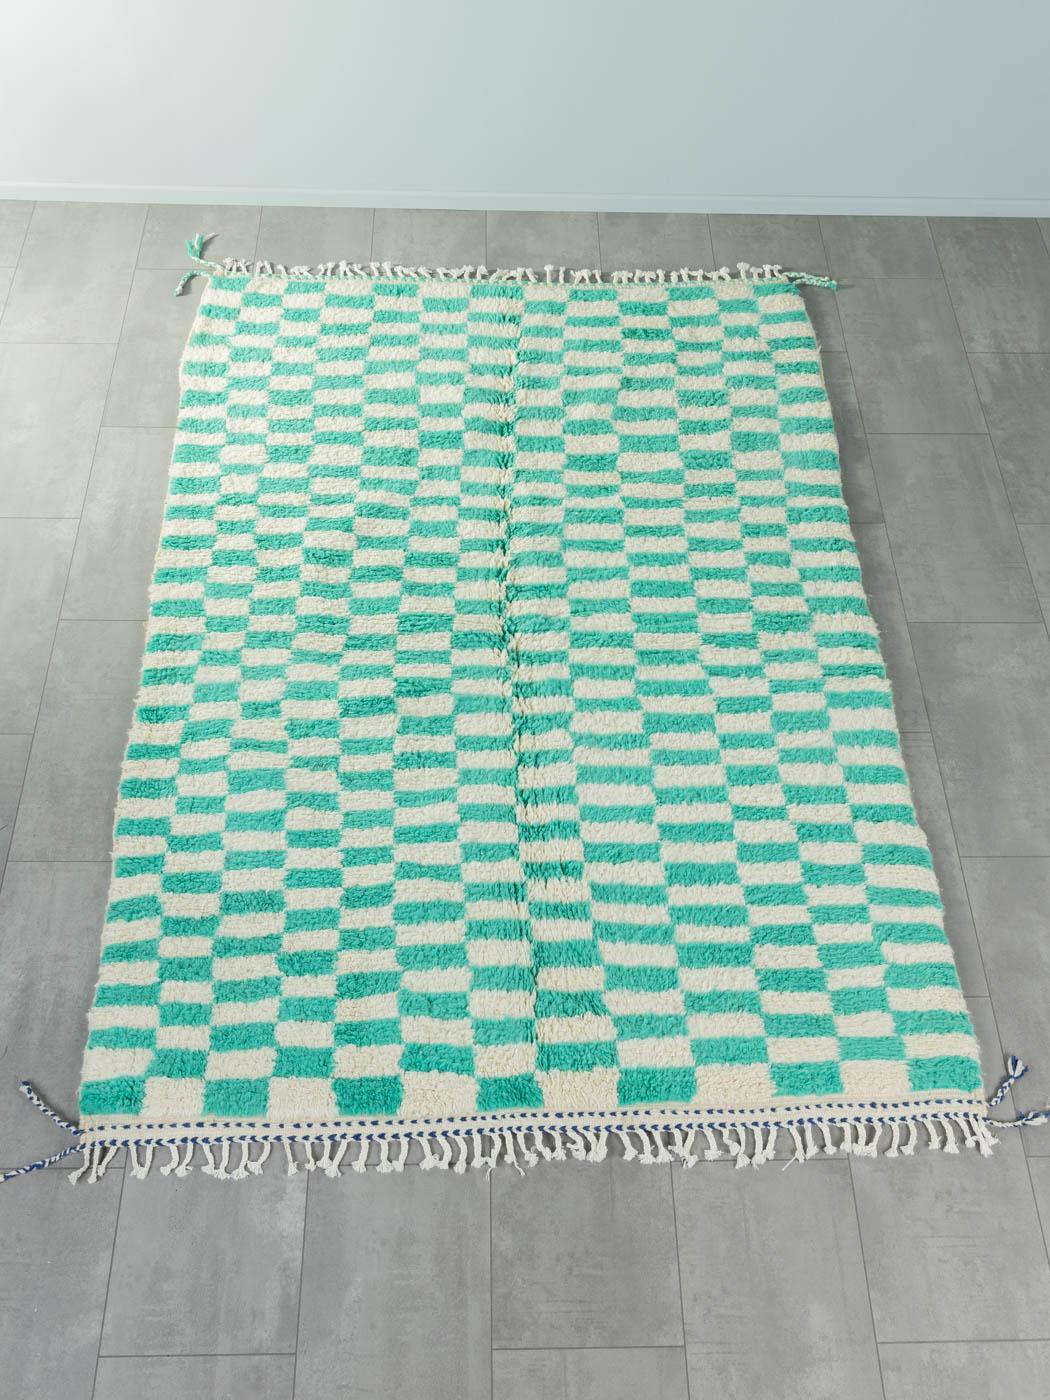 Peppermint check is a contemporary 100% wool rug – thick and soft, comfortable underfoot. Our Berber rugs are handwoven and handknotted by Amazigh women in the Atlas Mountains. These communities have been crafting rugs for thousands of years. One